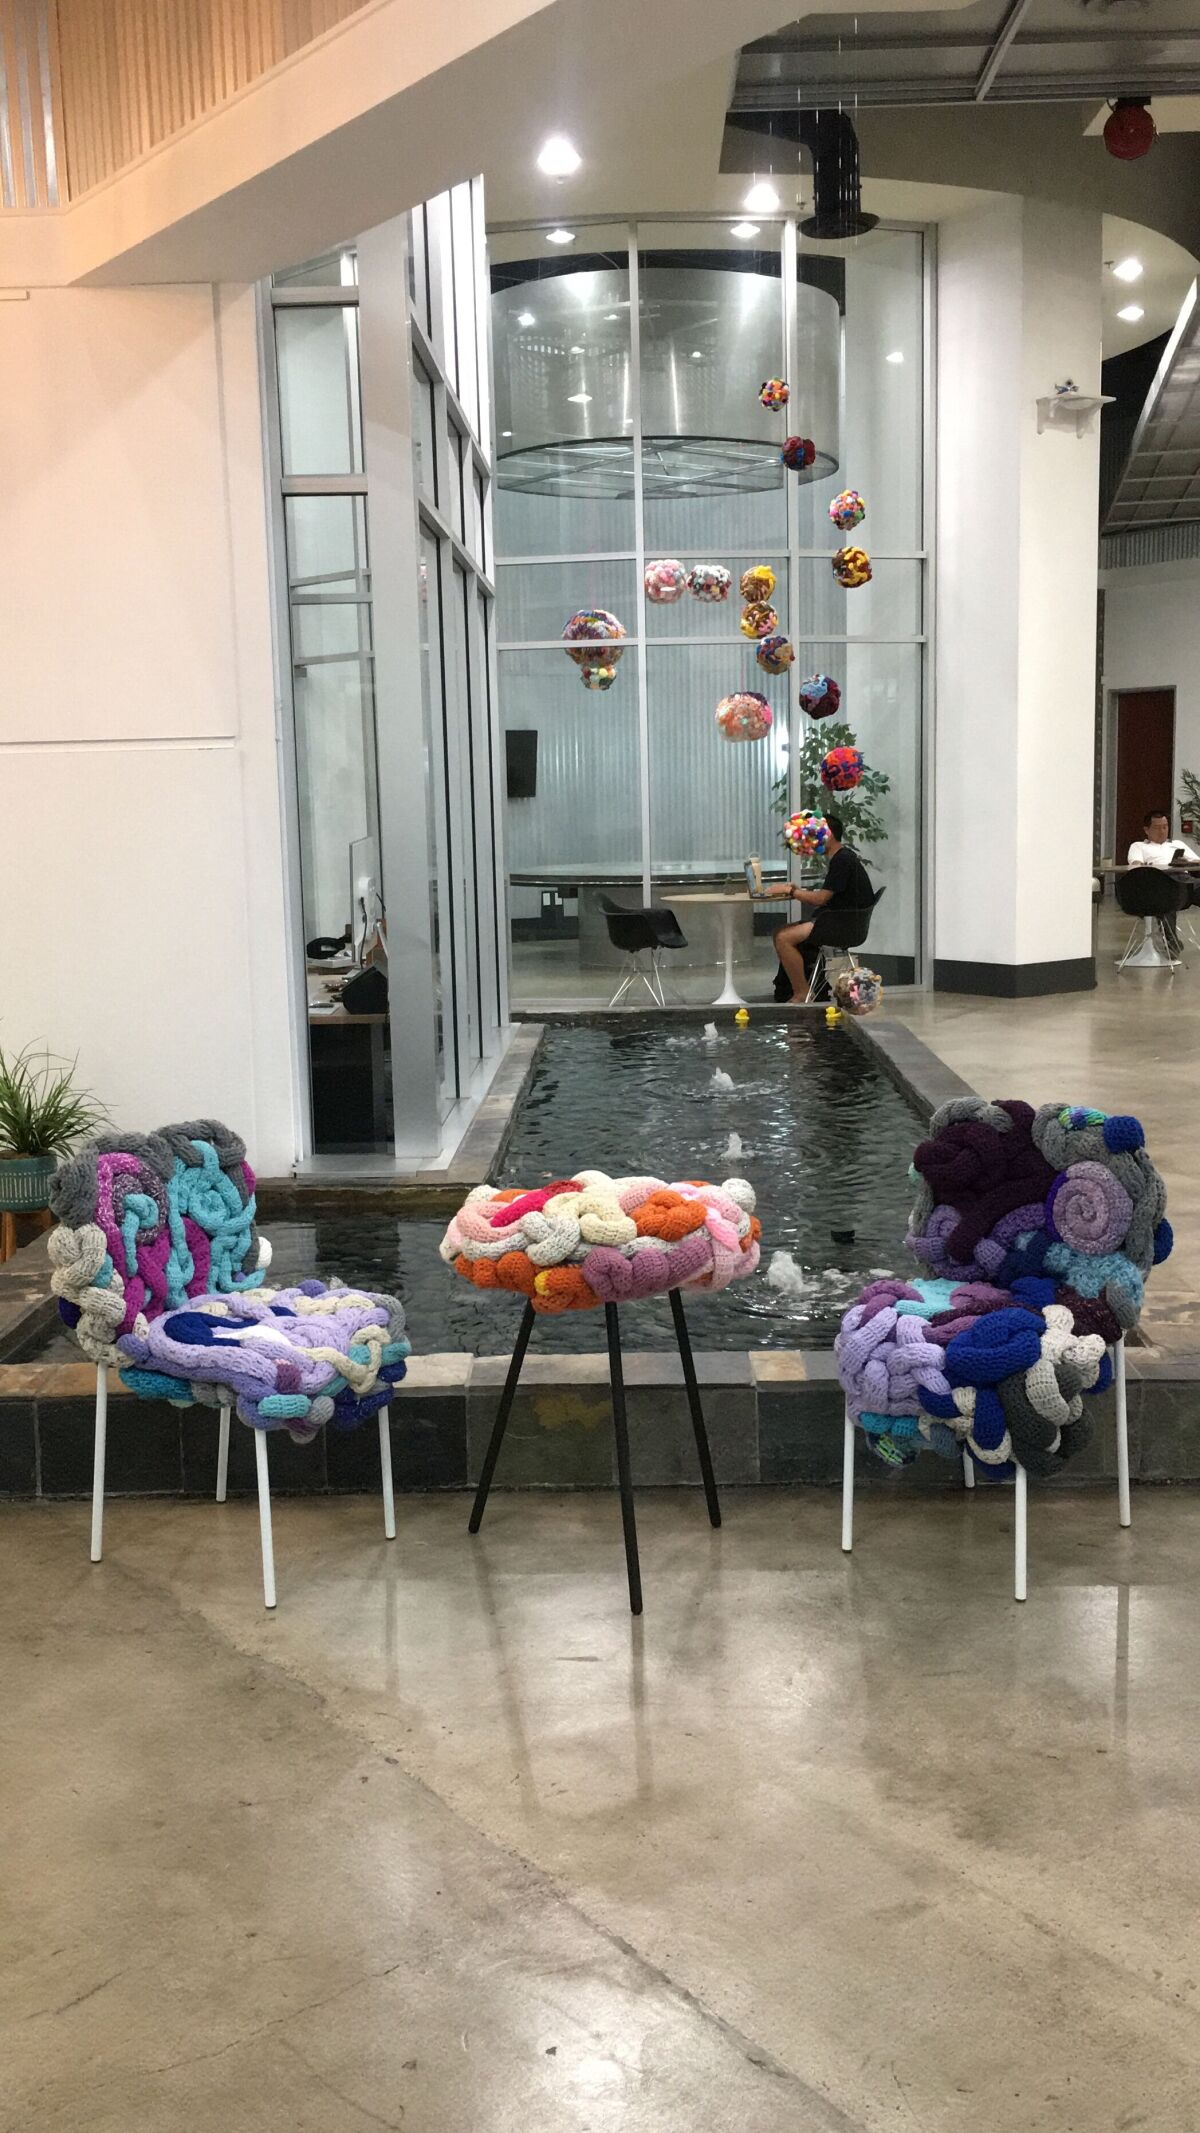 Threadwinners' "zer | o" exhibit, presented by Aquila Projects at Irvine's WorkWell, decorates multiple rooms of the co-working space, including a set of tube chairs and a side table. Behind are hanging yarn sculptures over the office's indoor fountain.